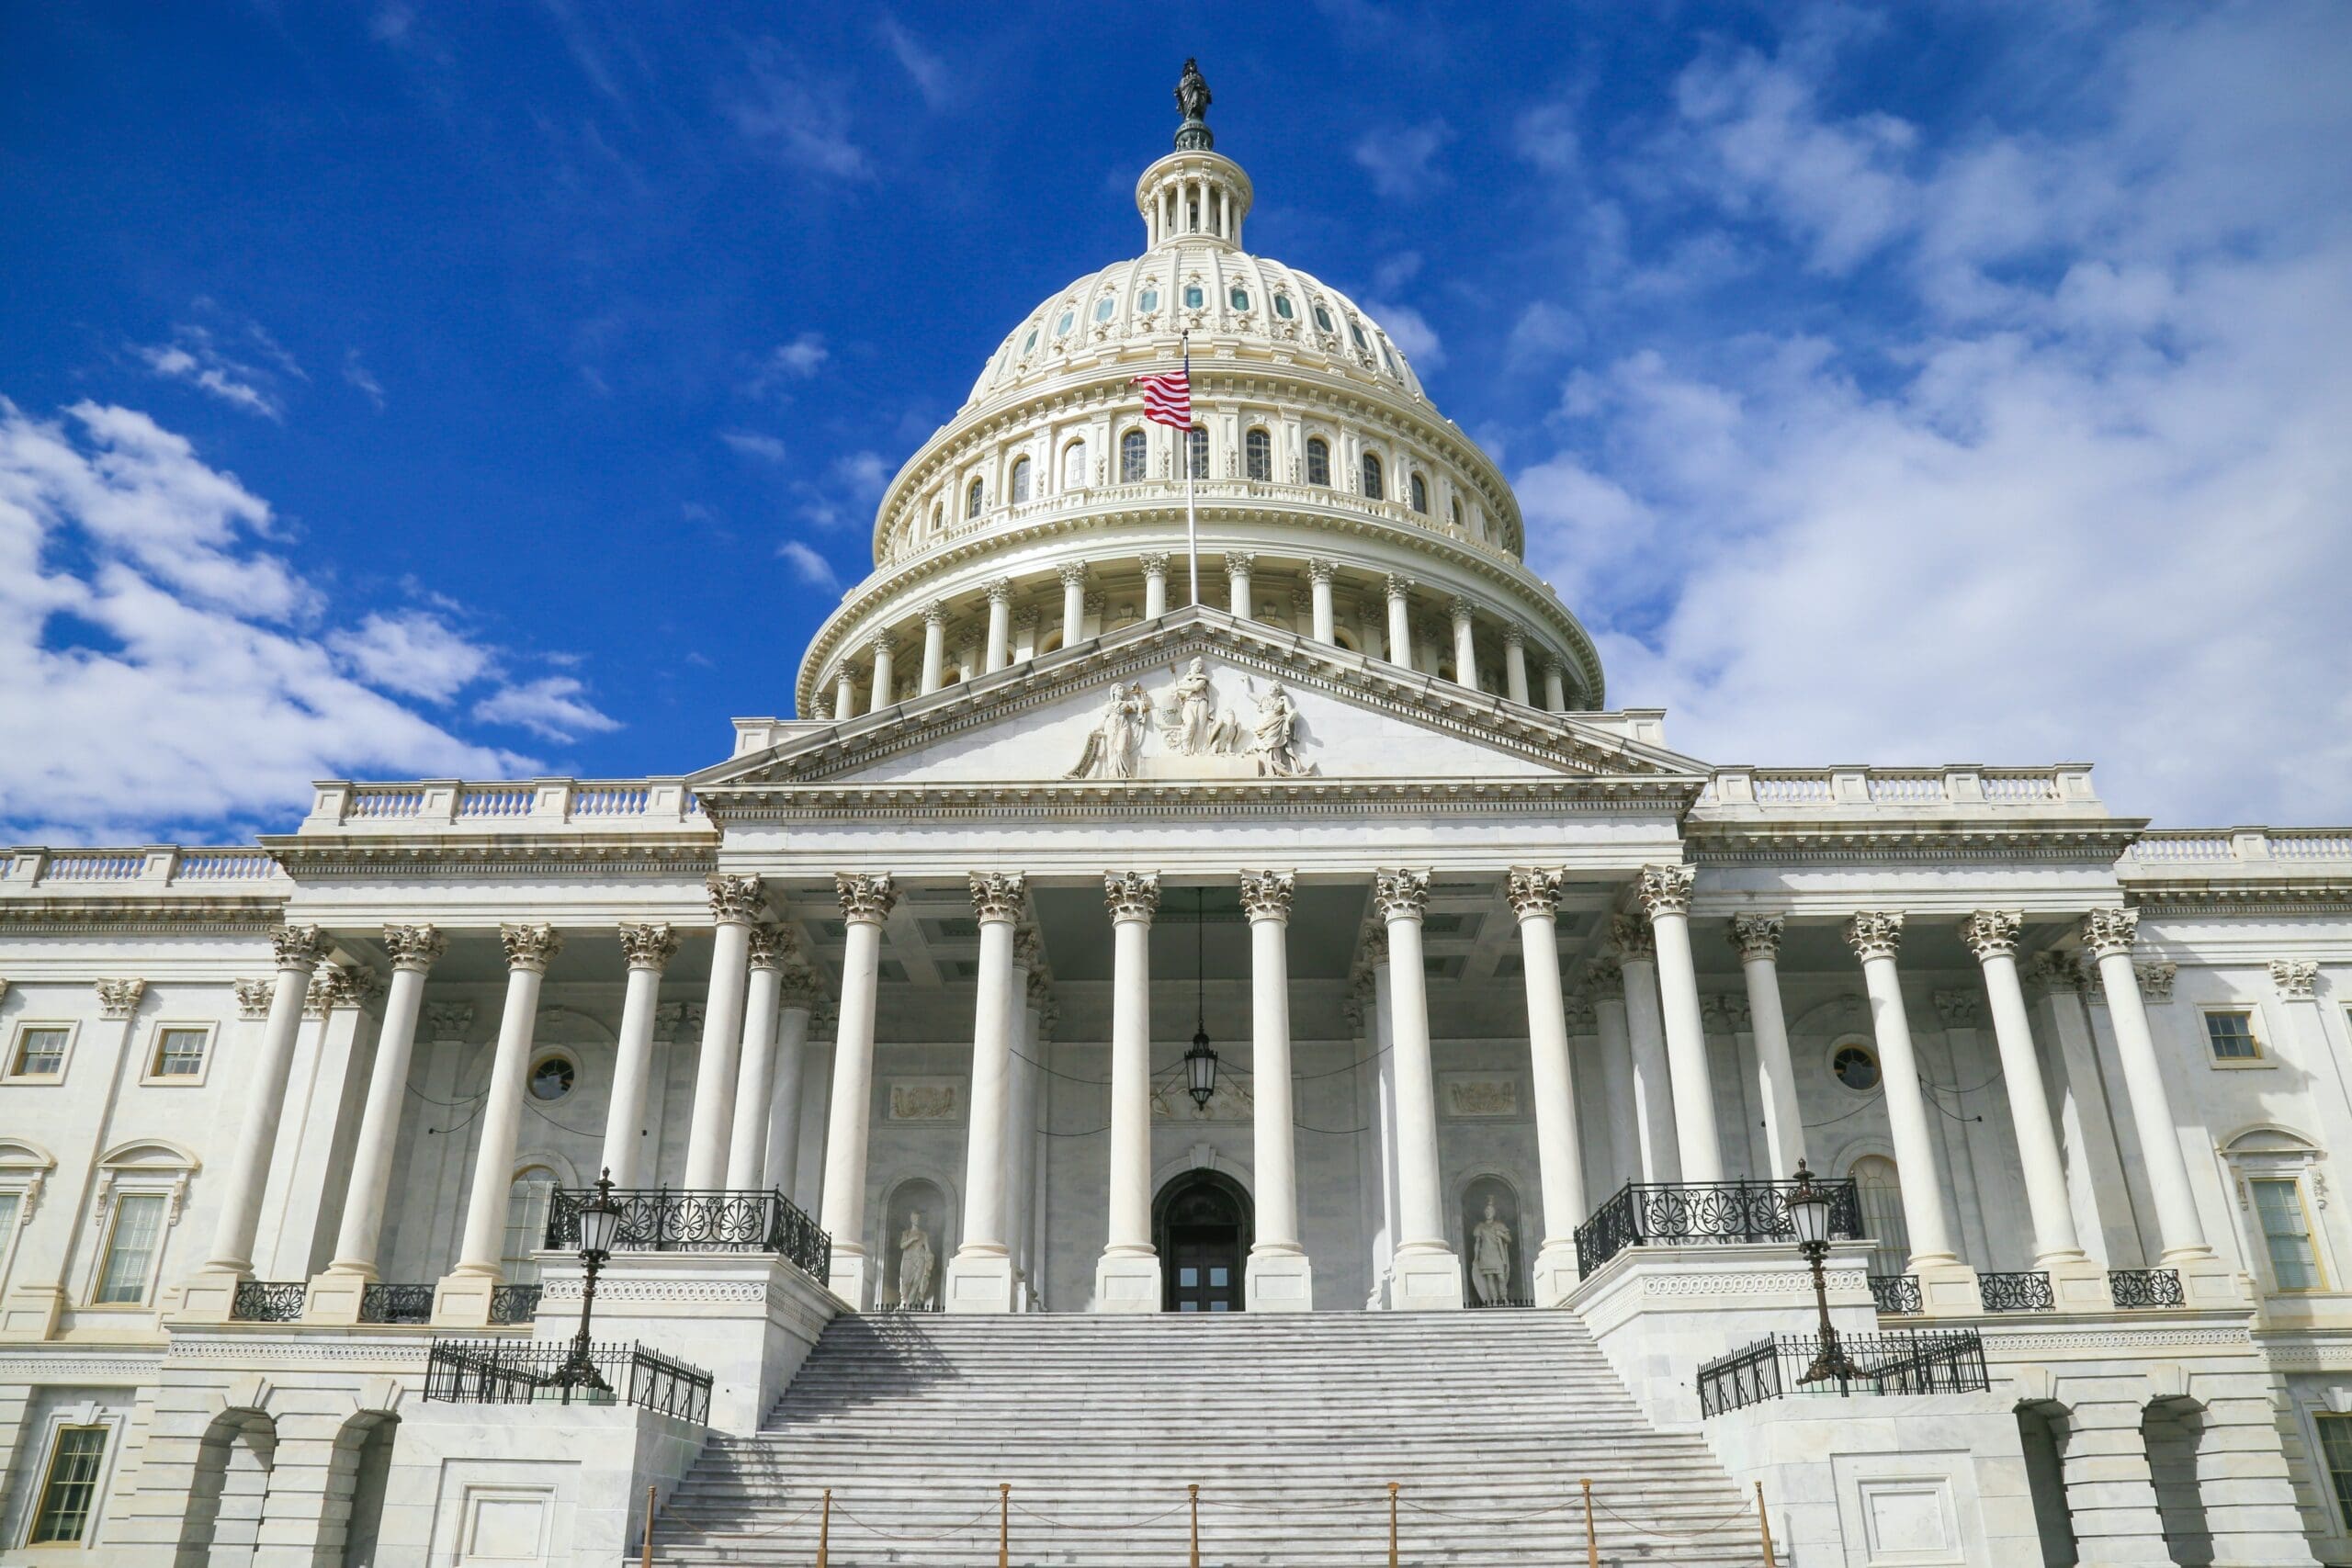 Carl Rifino and Joshua Donophan have been selected as Delaware's 2023 delegates for the U.S. Senate Youth Program. (Unsplash)